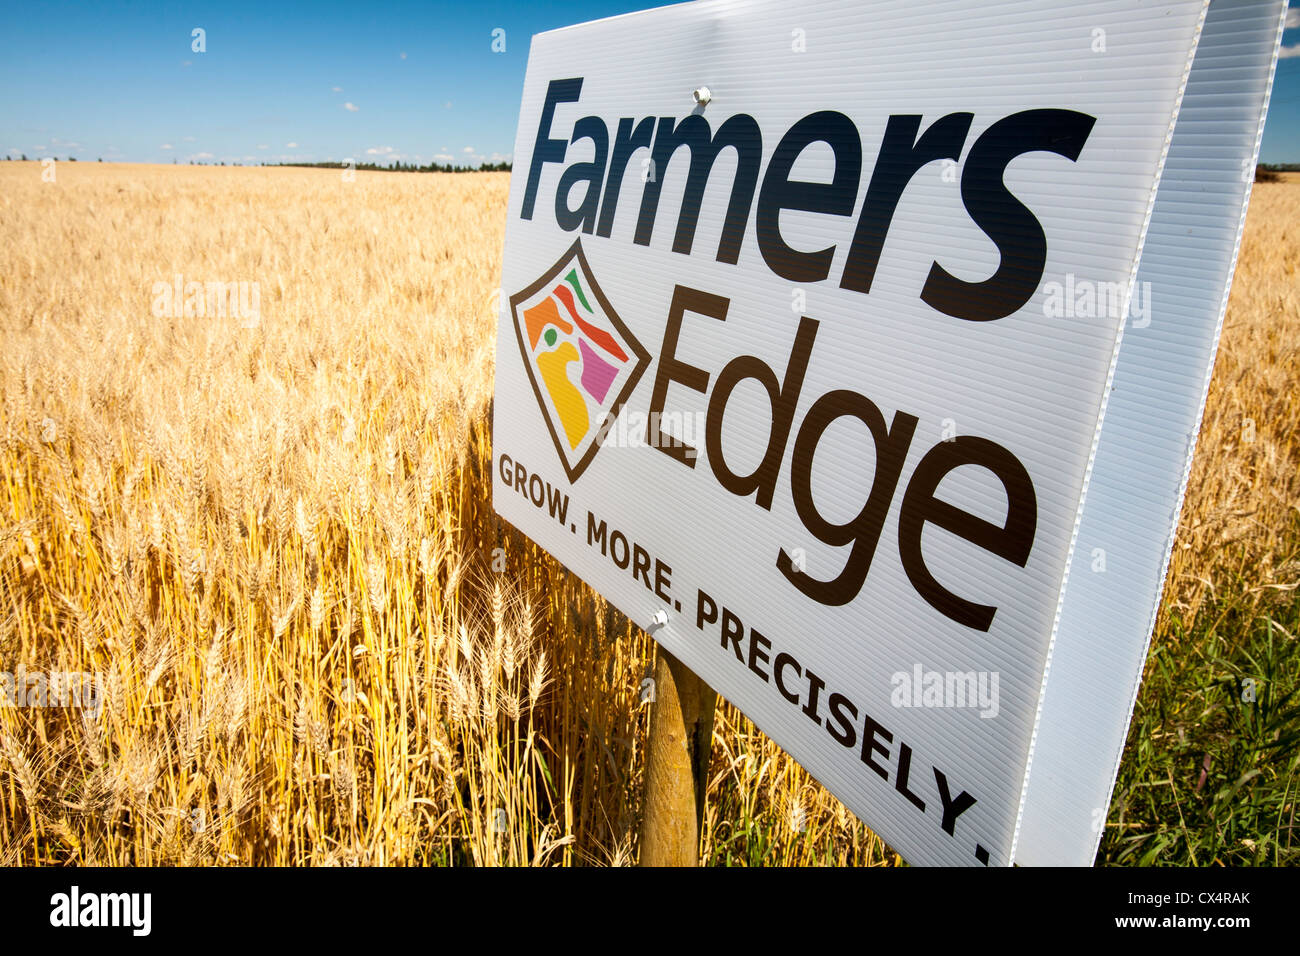 A field of Wheat in Alberta, Canada, near Lacombe, with an advert for the agri business system used for controlling fertilizer Stock Photo